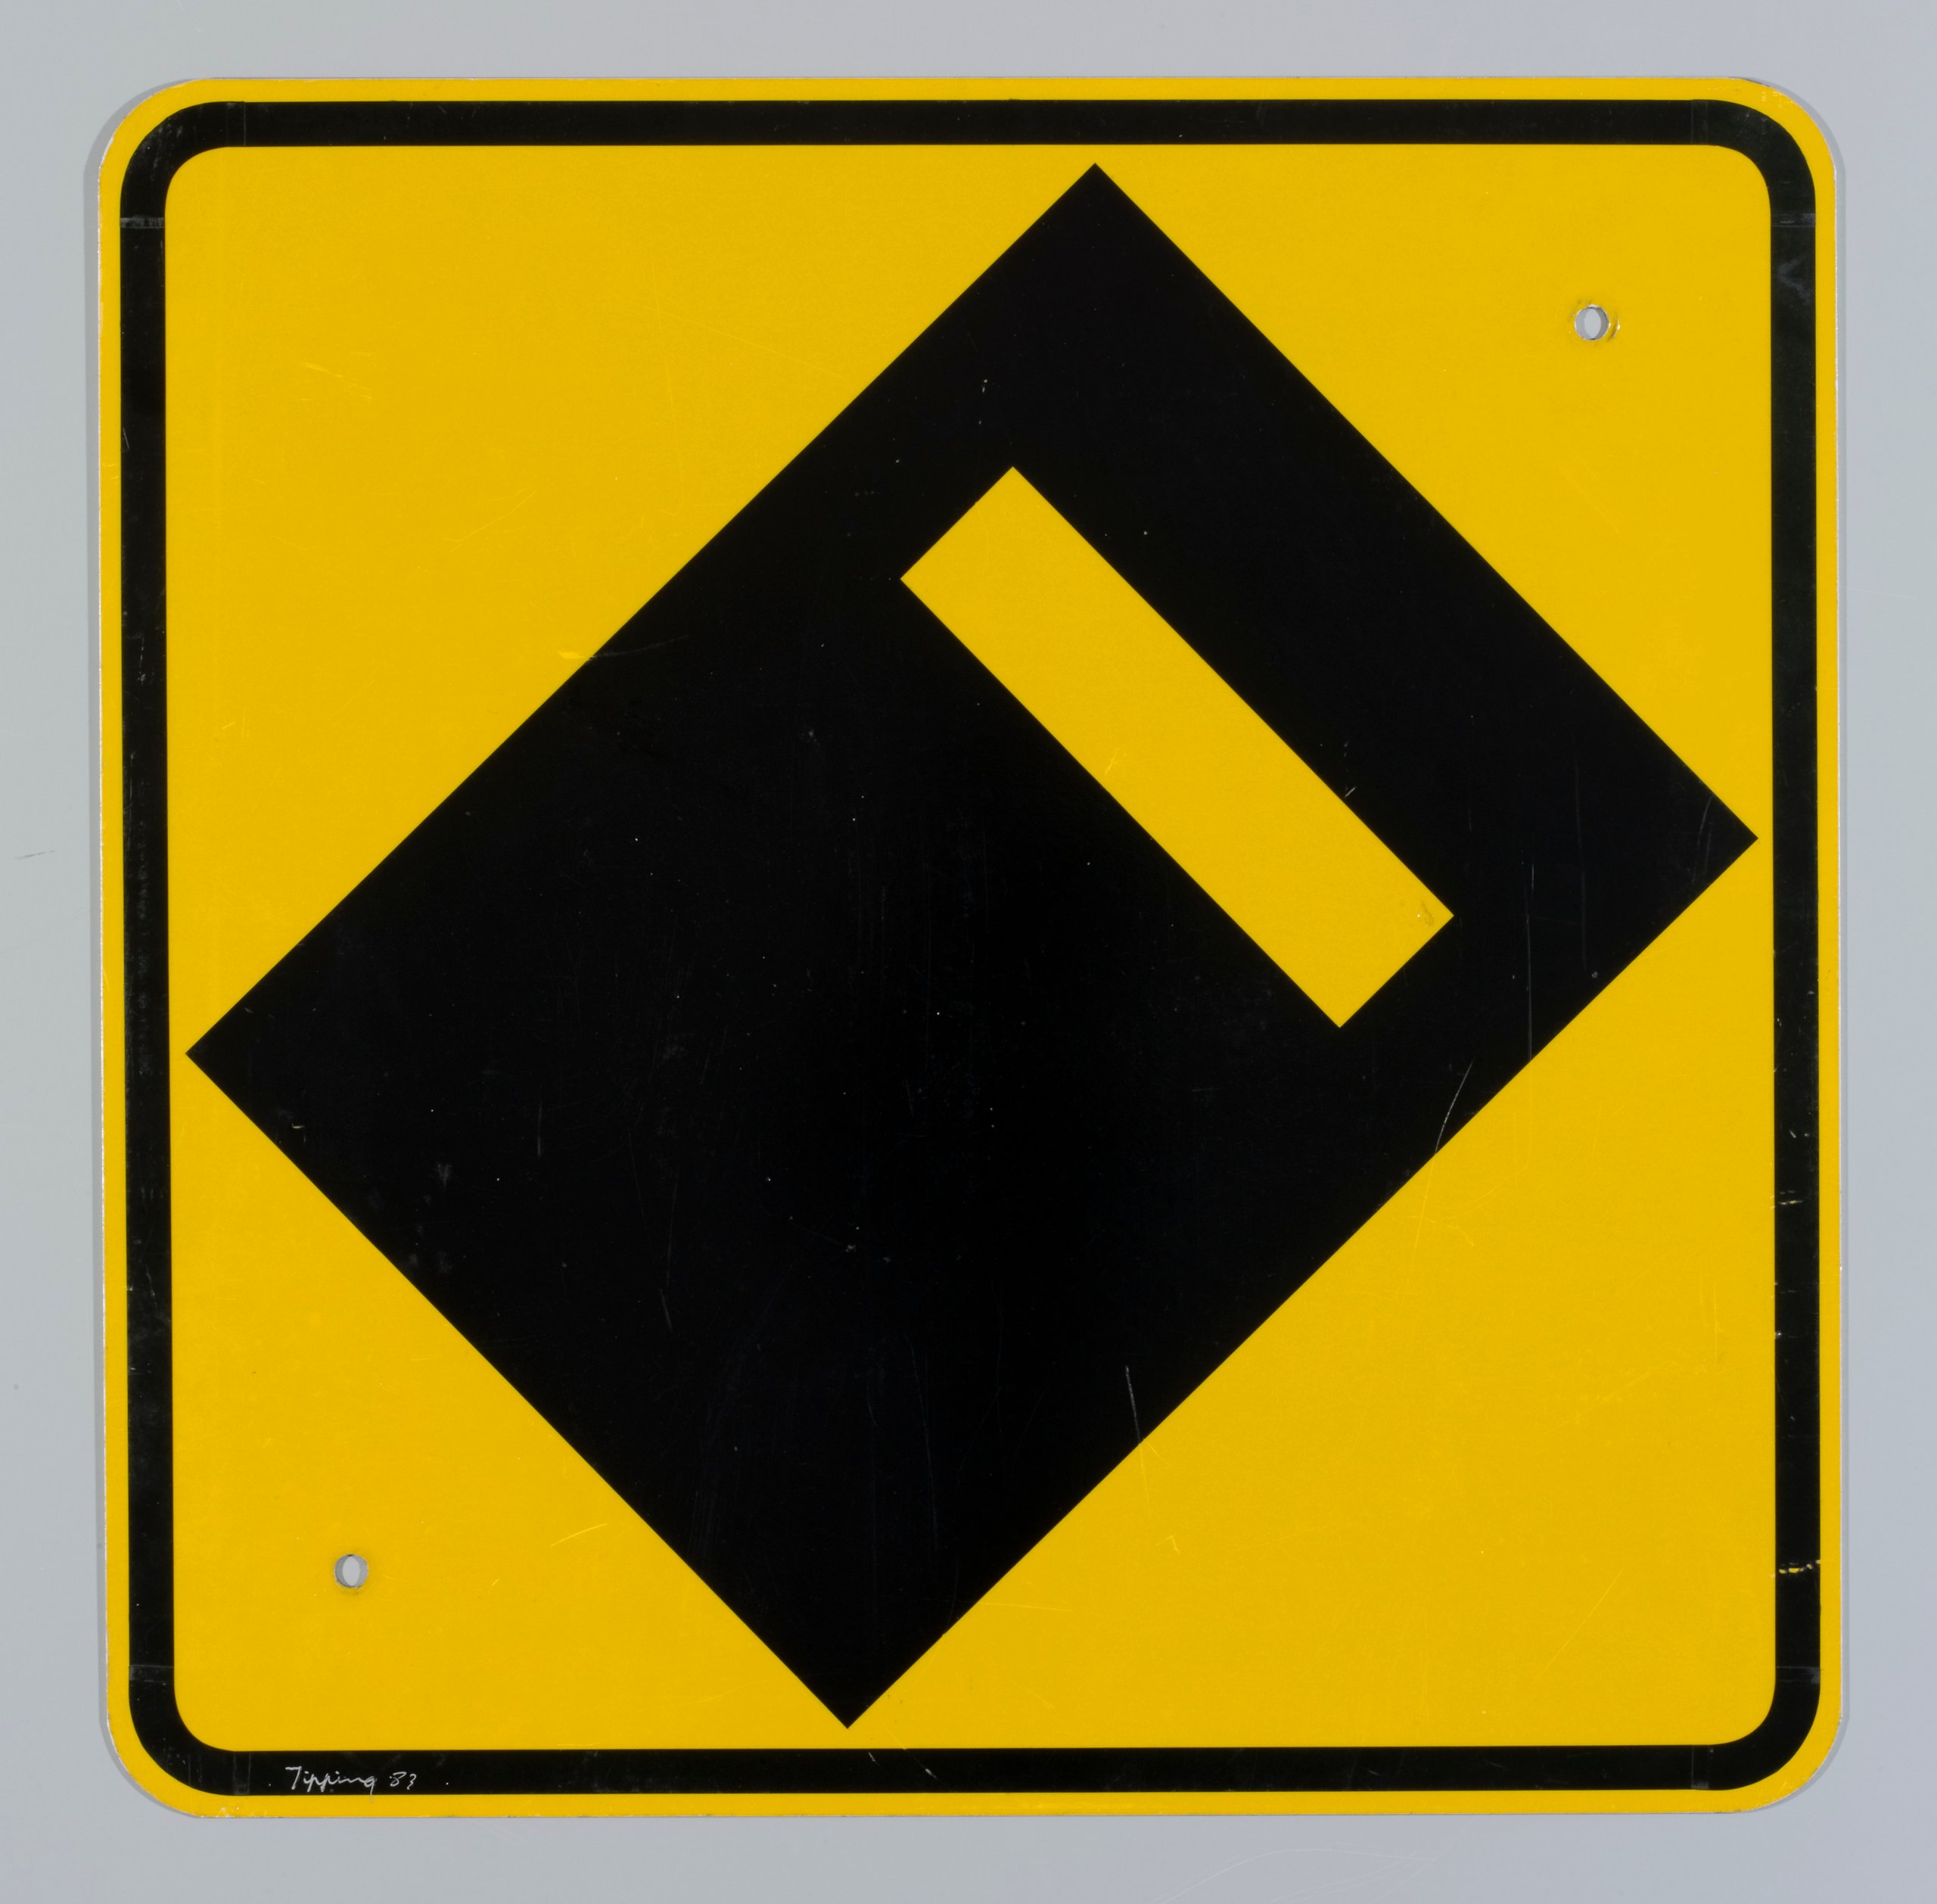 Manipulated road signs